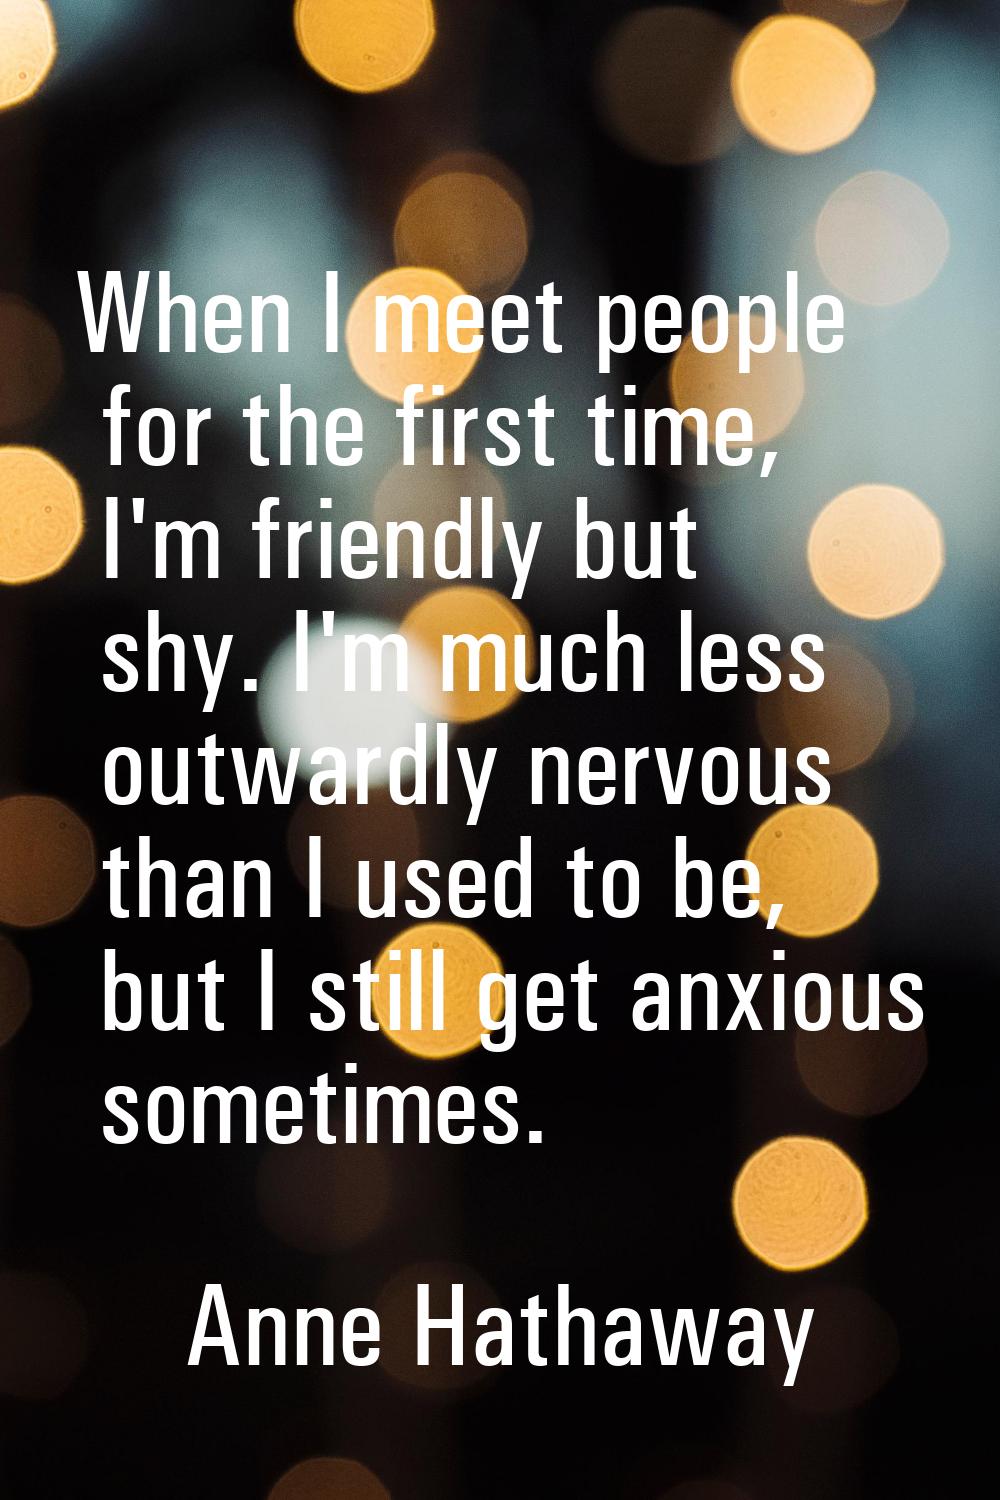 When I meet people for the first time, I'm friendly but shy. I'm much less outwardly nervous than I